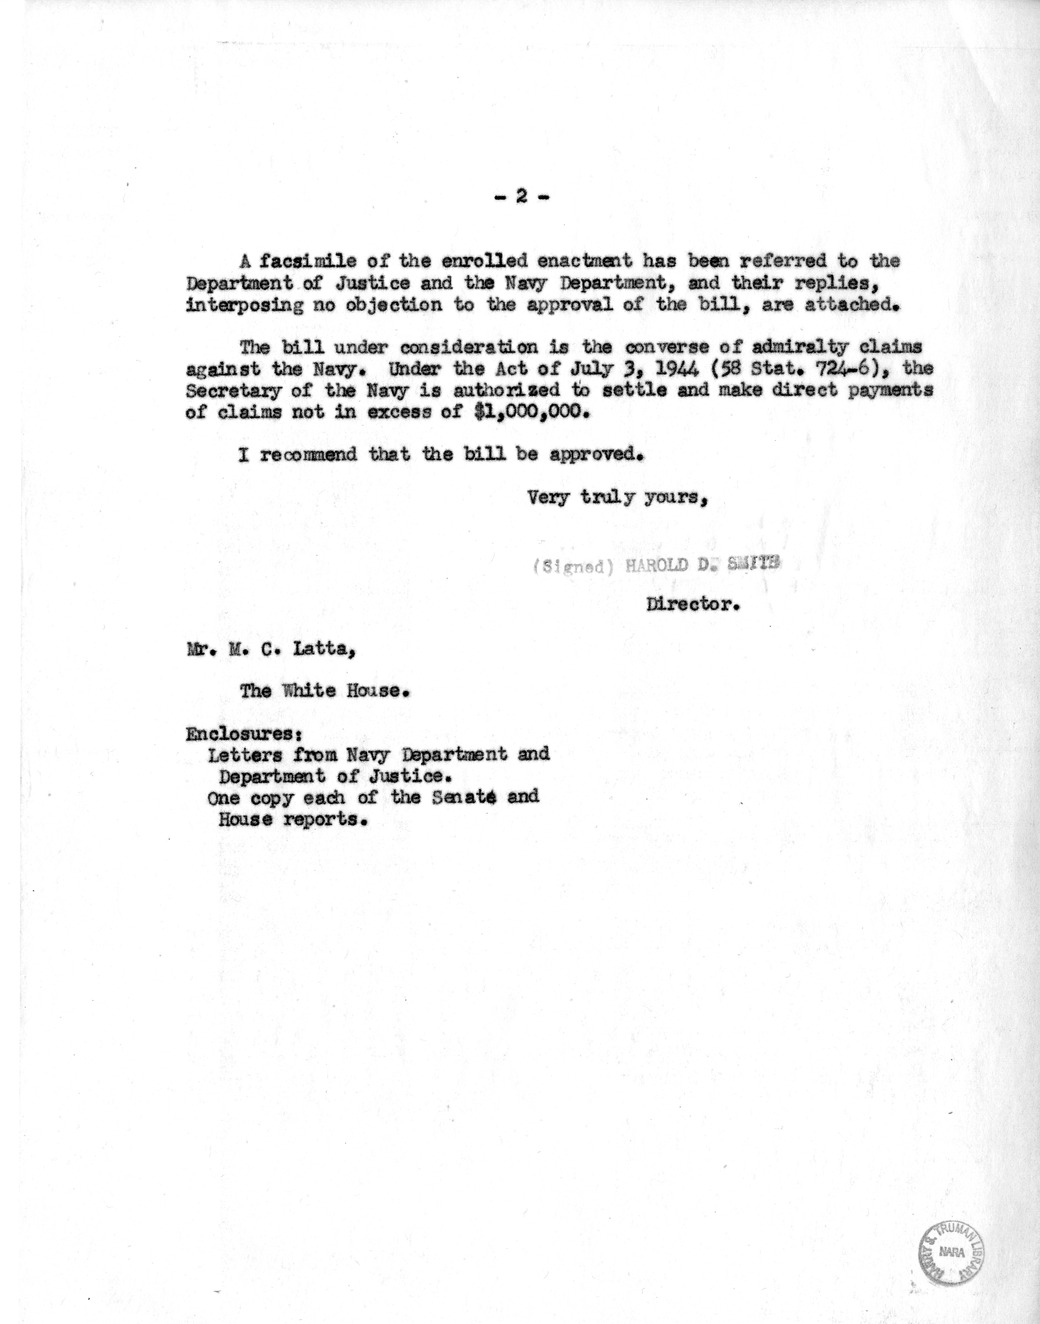 Memorandum from Harold D. Smith to M. C. Latta, S. 1364, To Provide for the Compromise and Settlement by the Secretary of the Navy of Certain Claims for Damage to Property Under the Jurisdiction of the Navy Department, to Provide for the Execution of Releases by the Secretary of the Navy Upon Payment of Such Claims, with Attachments